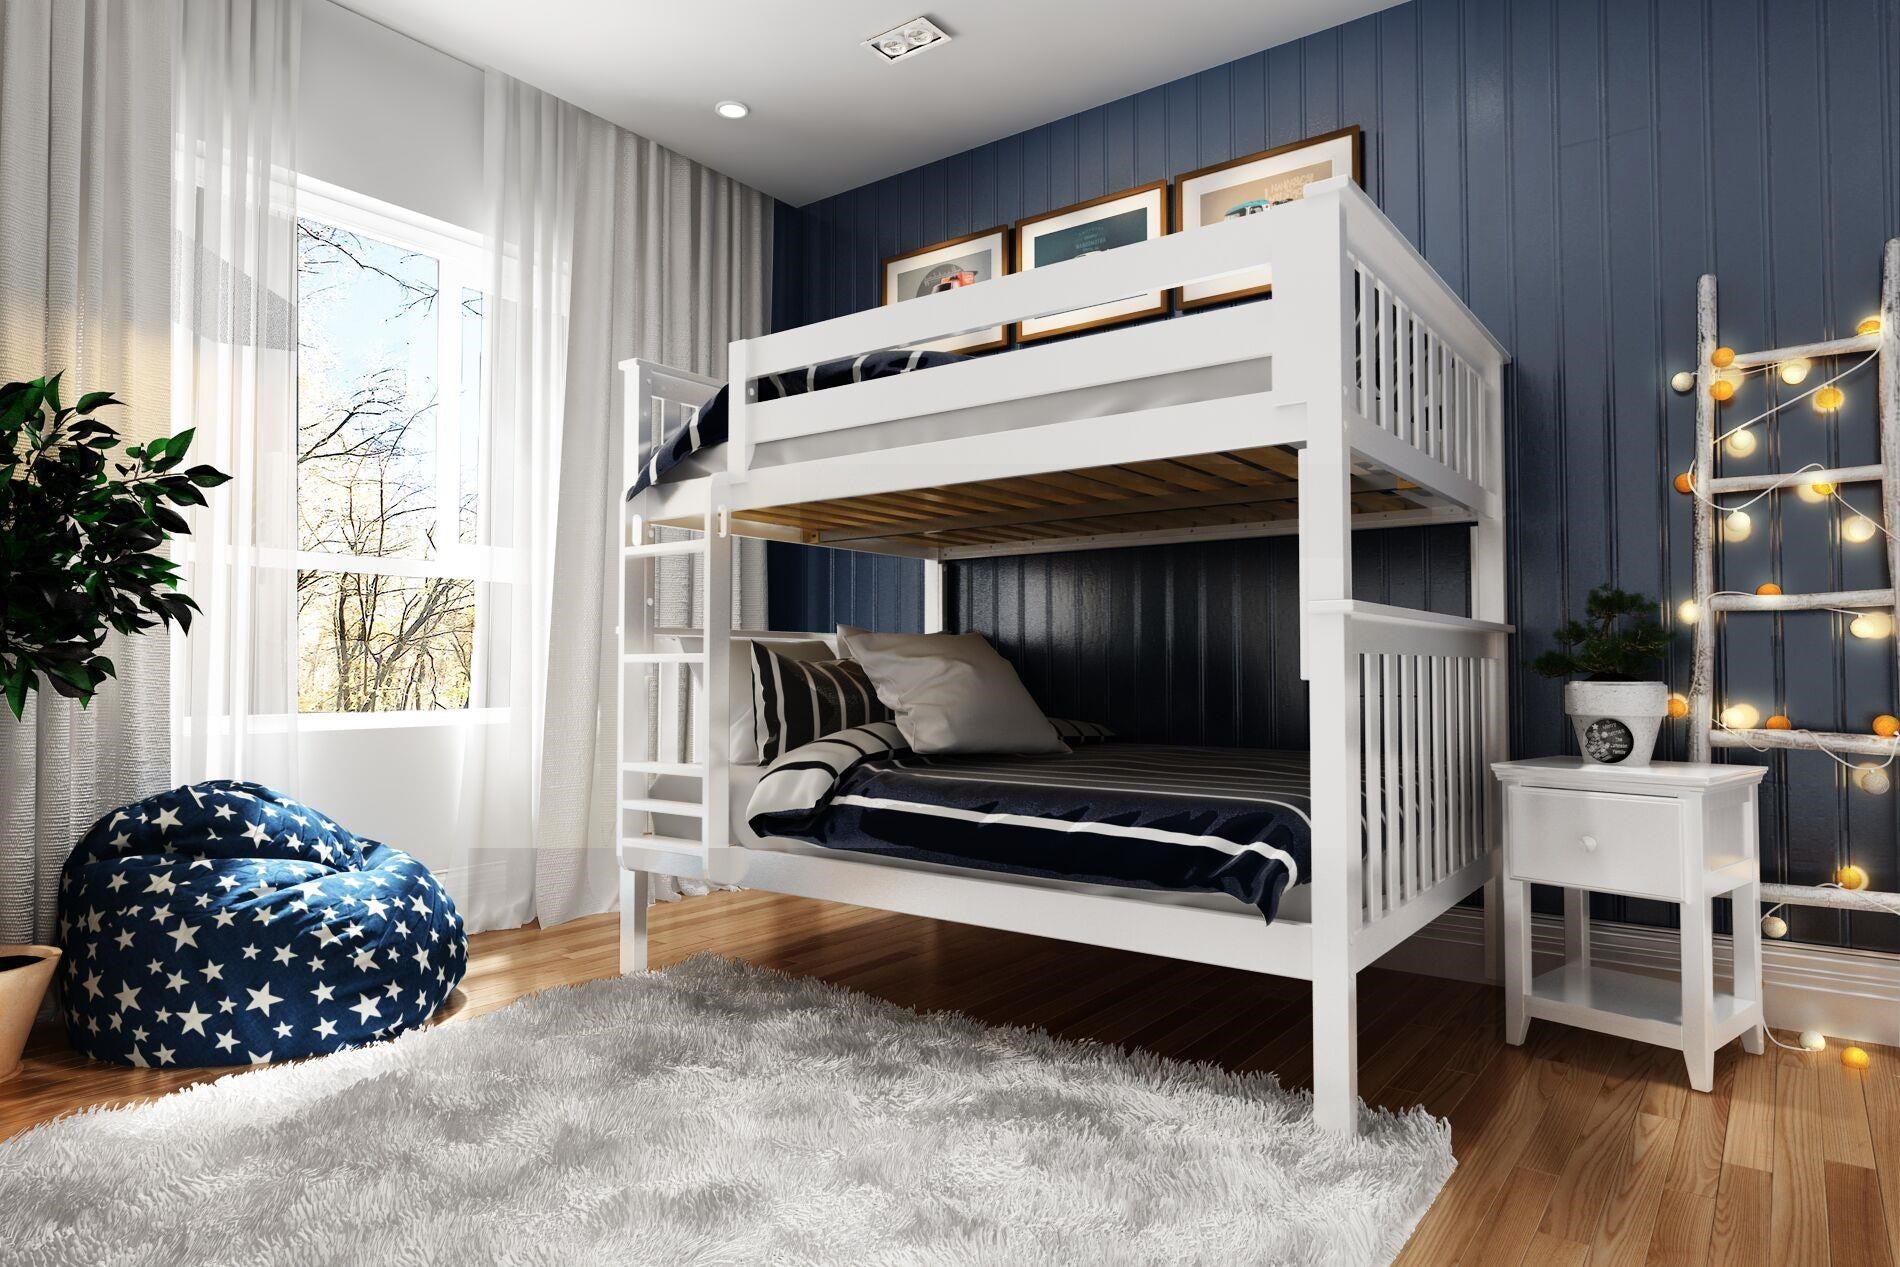 10 Creative Bunk Bed Ideas for Girls' Bedrooms